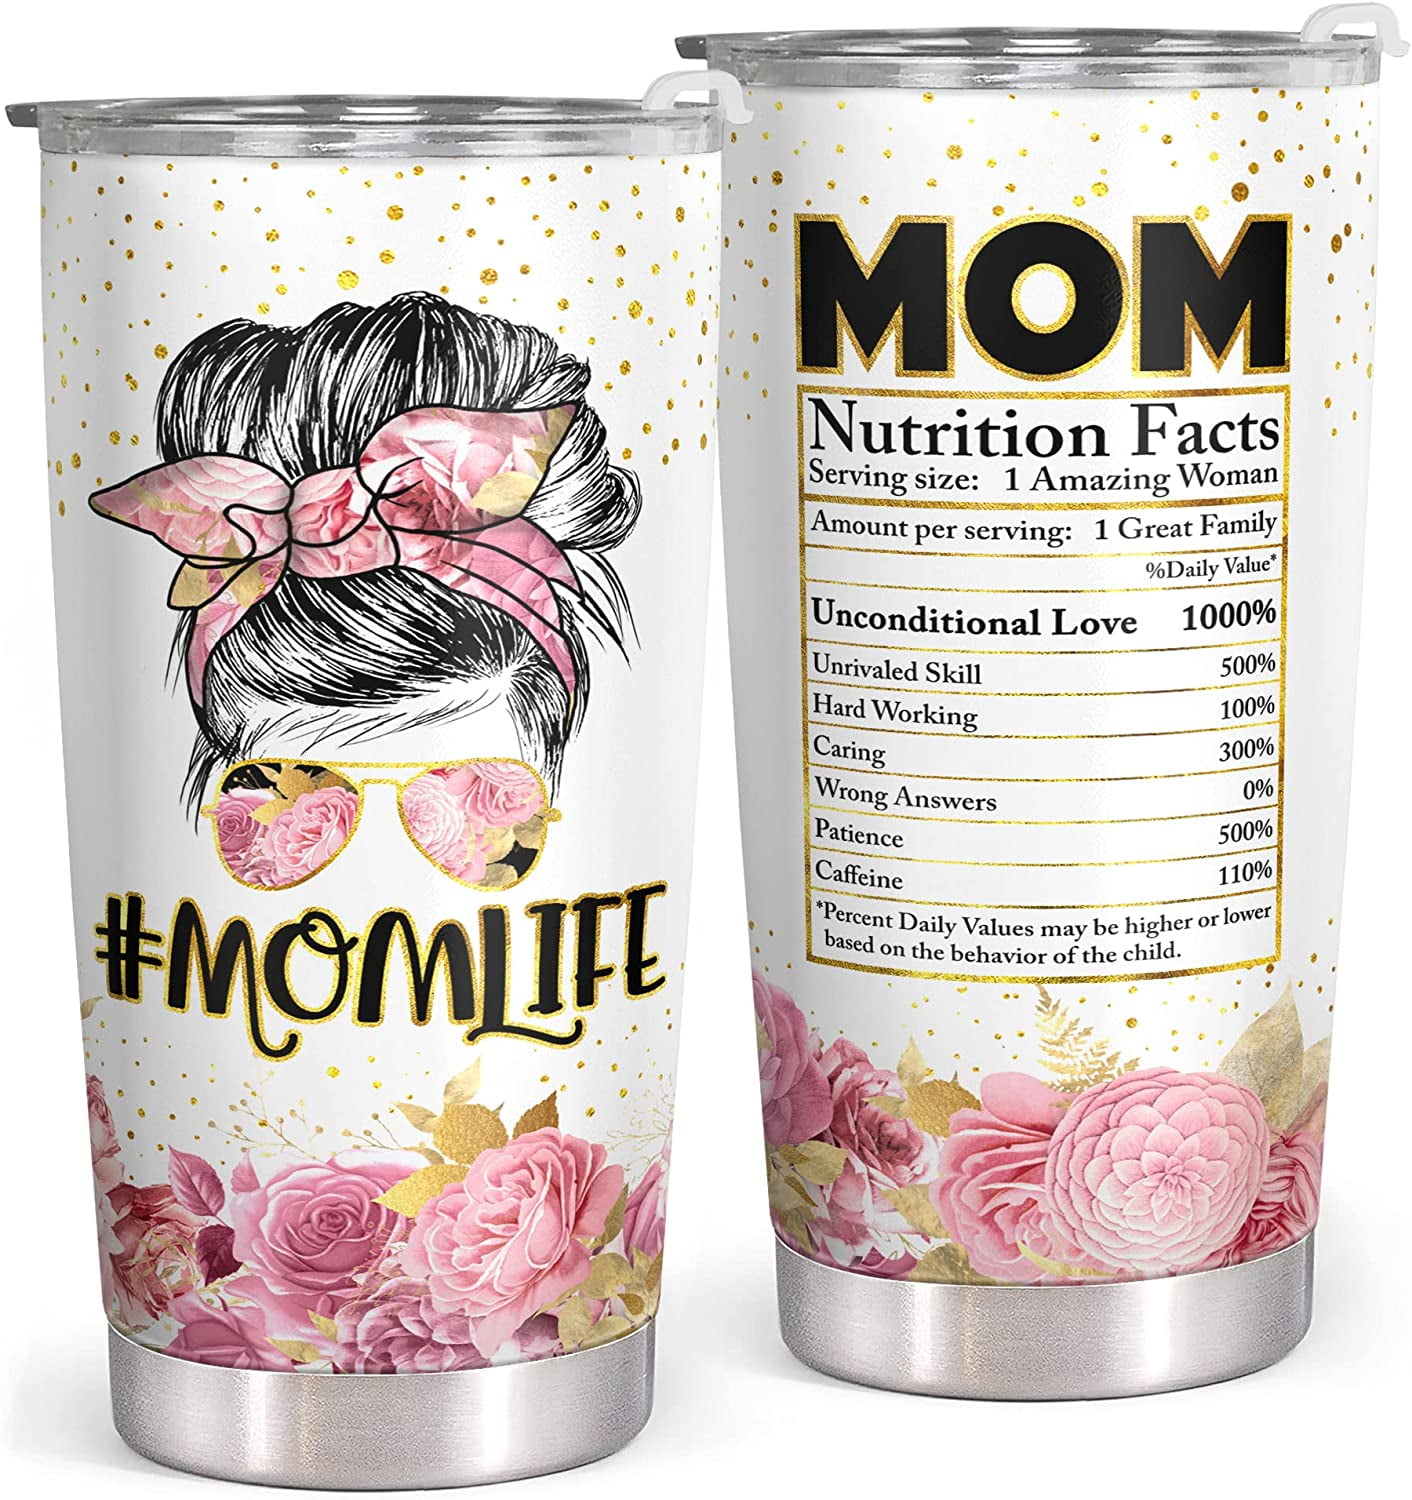 Mom Tumbler Gift from Son – Behind Every Great Man Is An Even Greater  Mother – Mother’s Day, Birthday Gift for Her